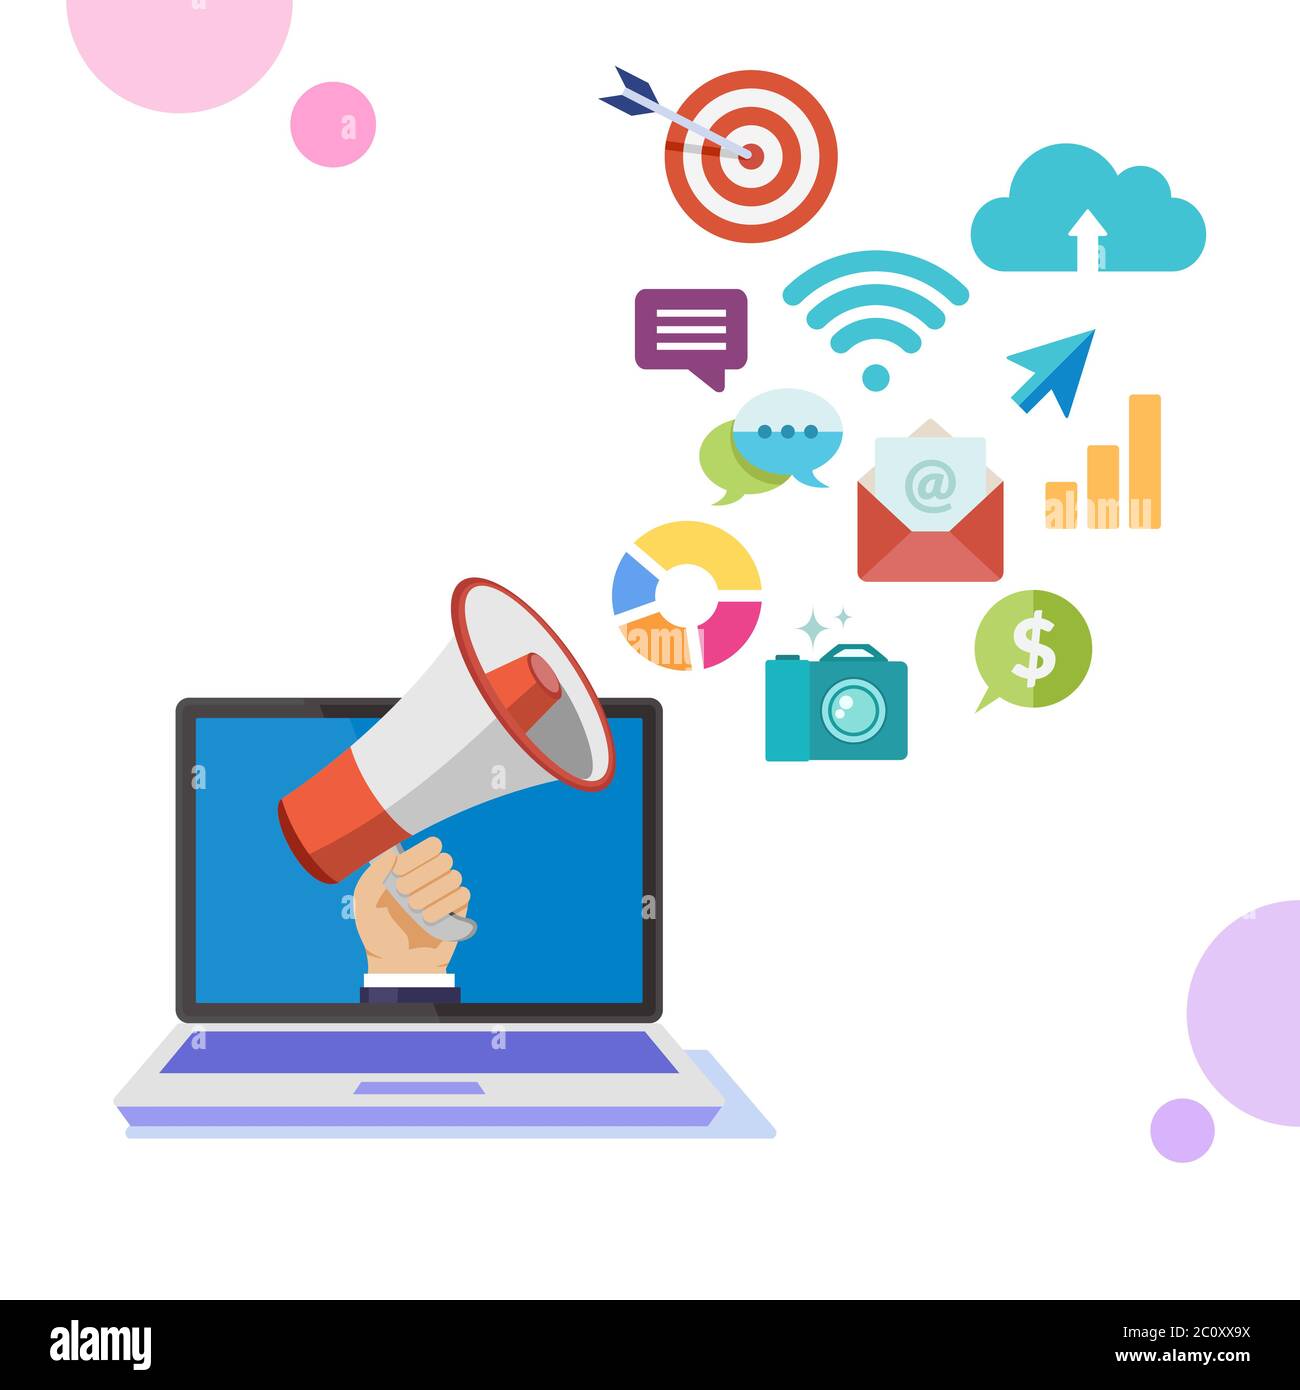 Vector illustration of online marketing strategy with multimedia service platform. Business service promotion plans. Top internet marketing product. Stock Vector